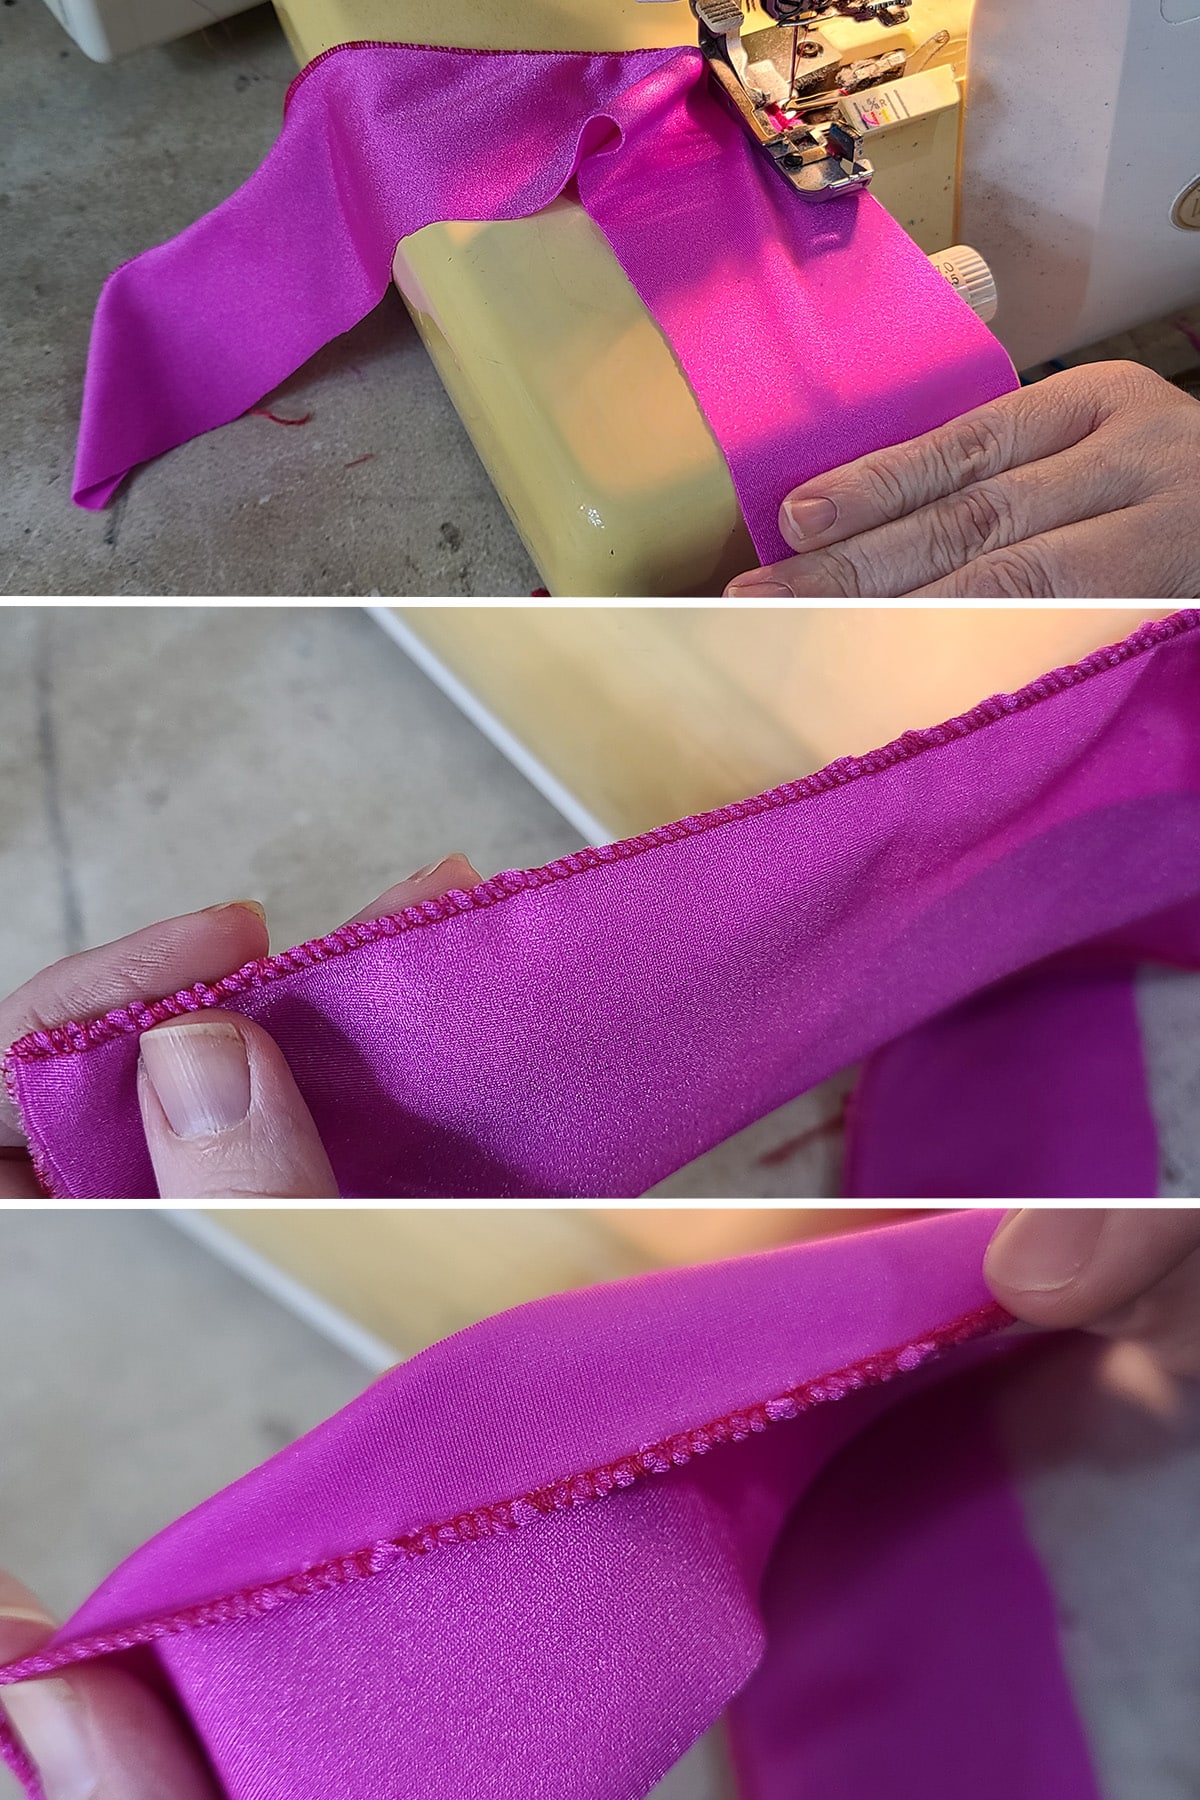 A 3 part image showing spandex being serged, and that same strip with a bumpy, uneven hem.